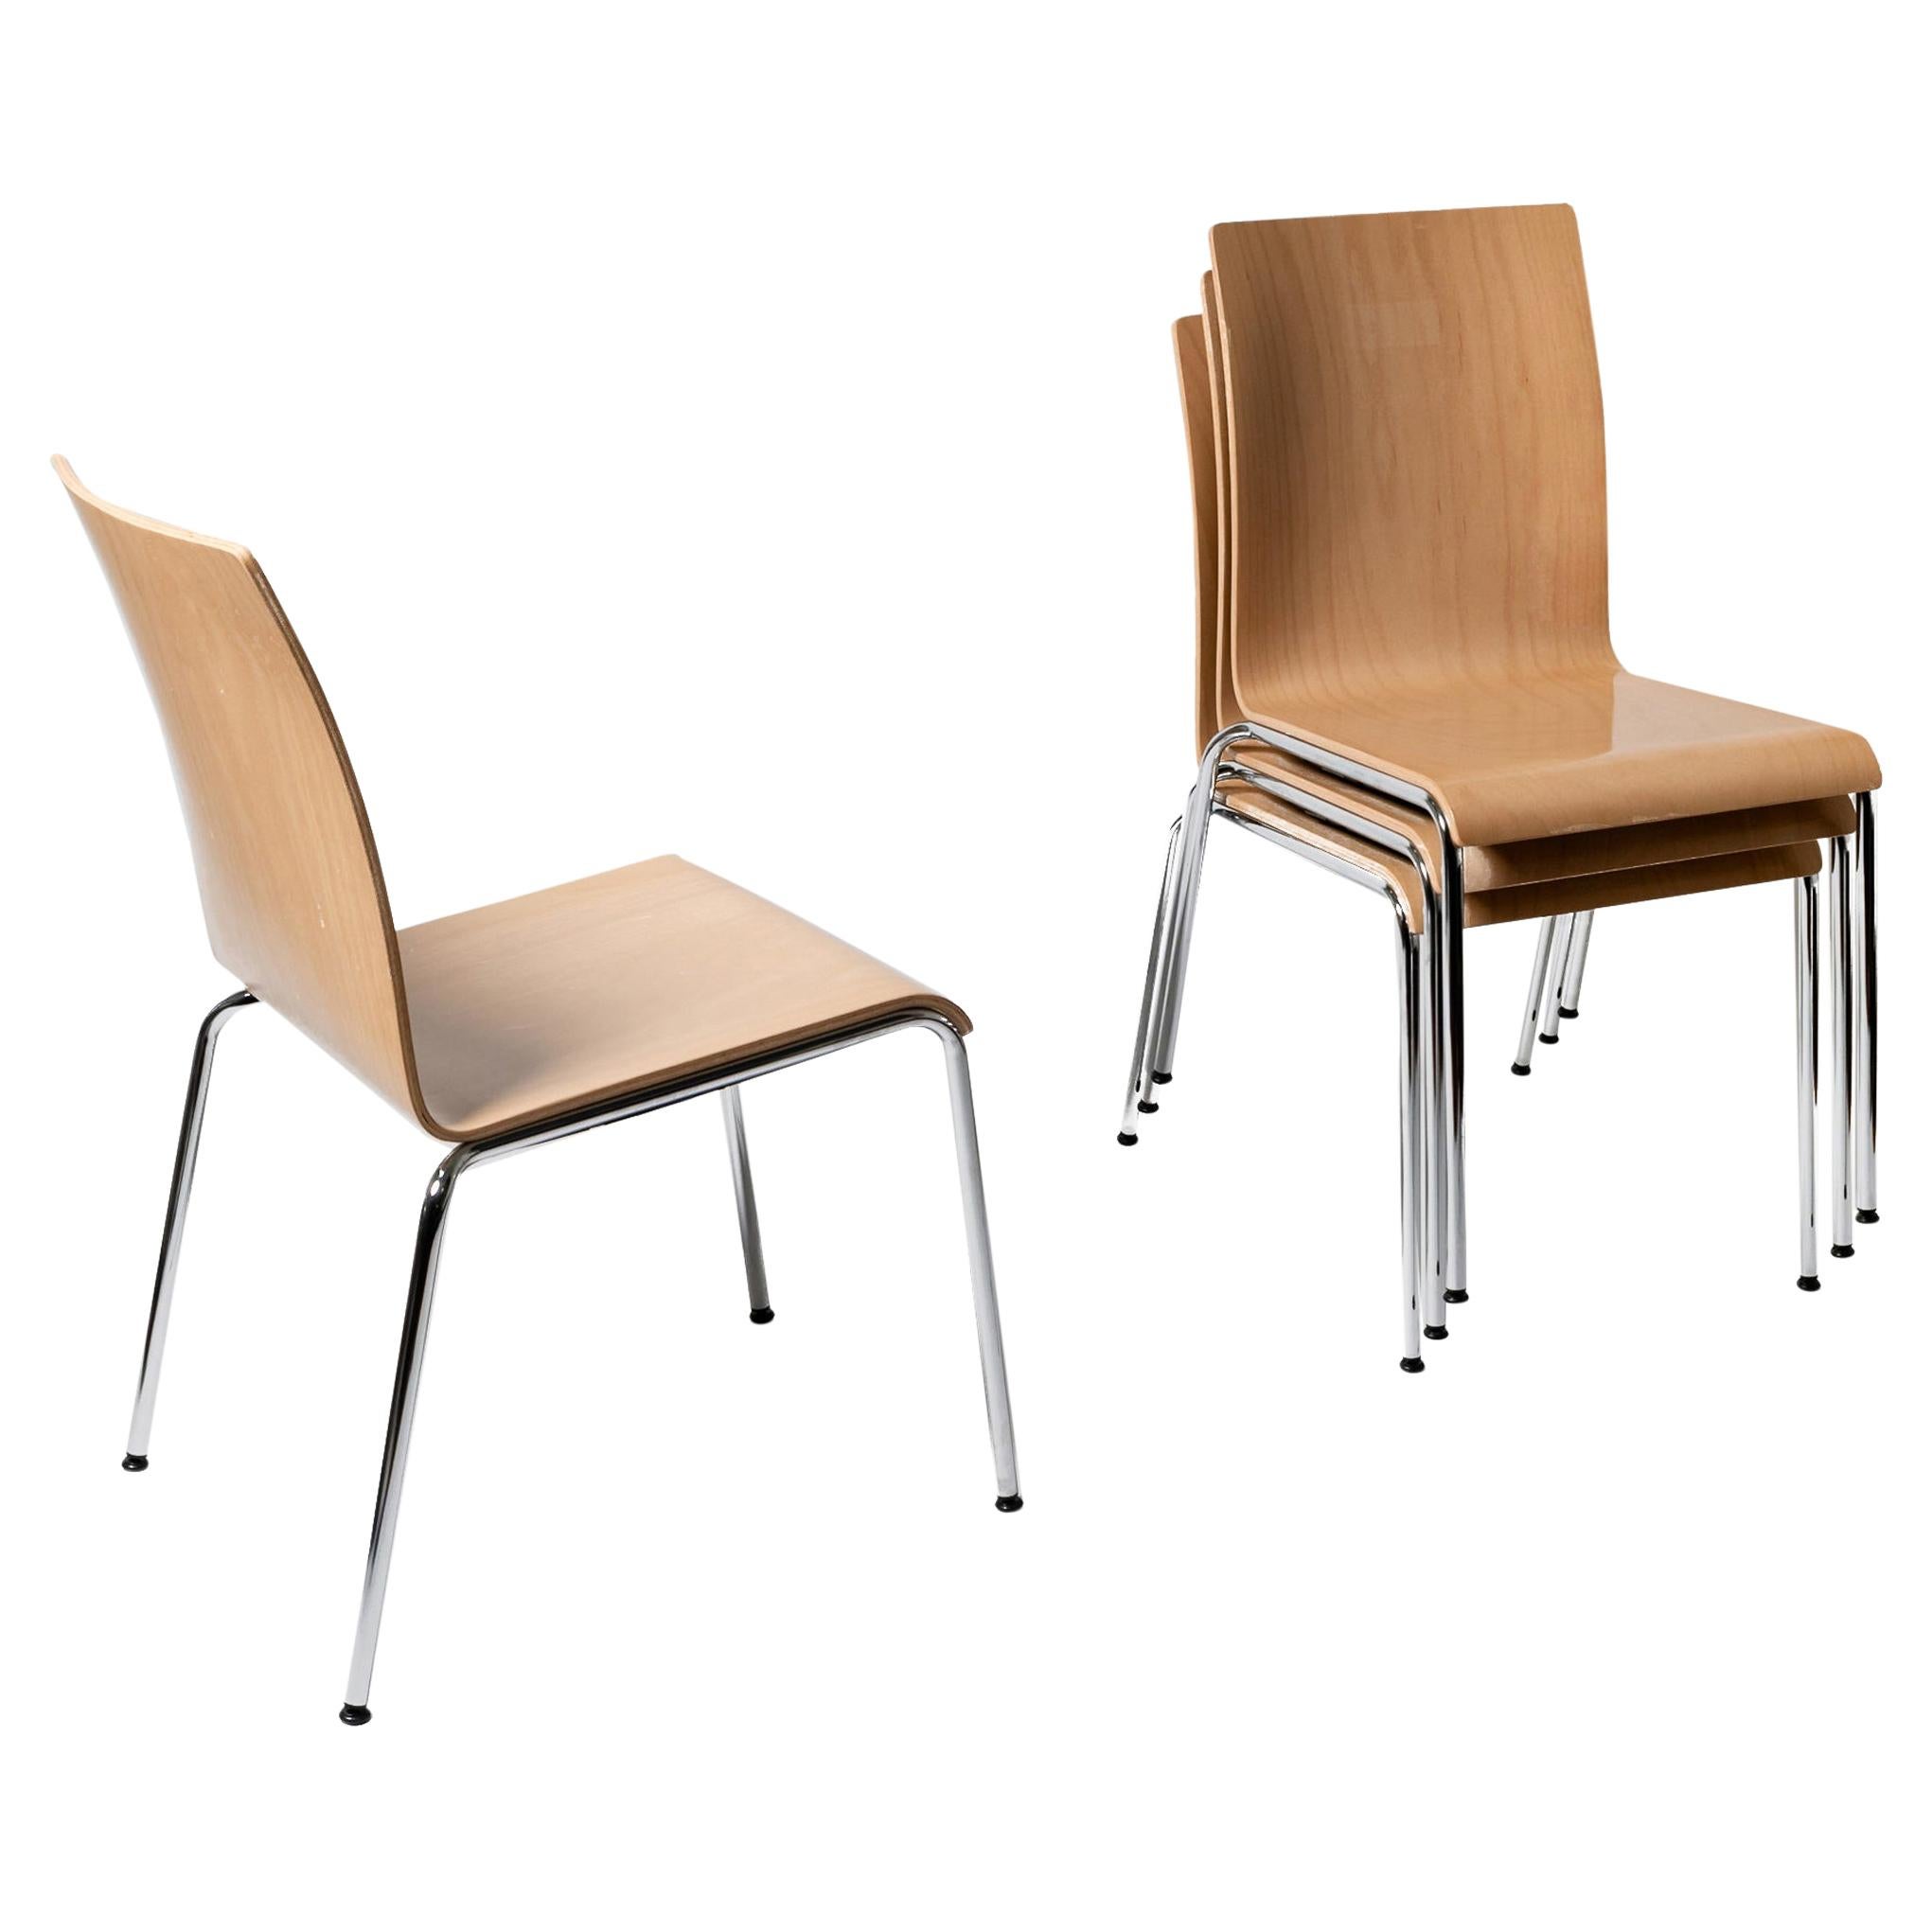 Set of 4 Scandinavian Modern Poro S Dining Chairs in Beech, Made in Switzerland For Sale